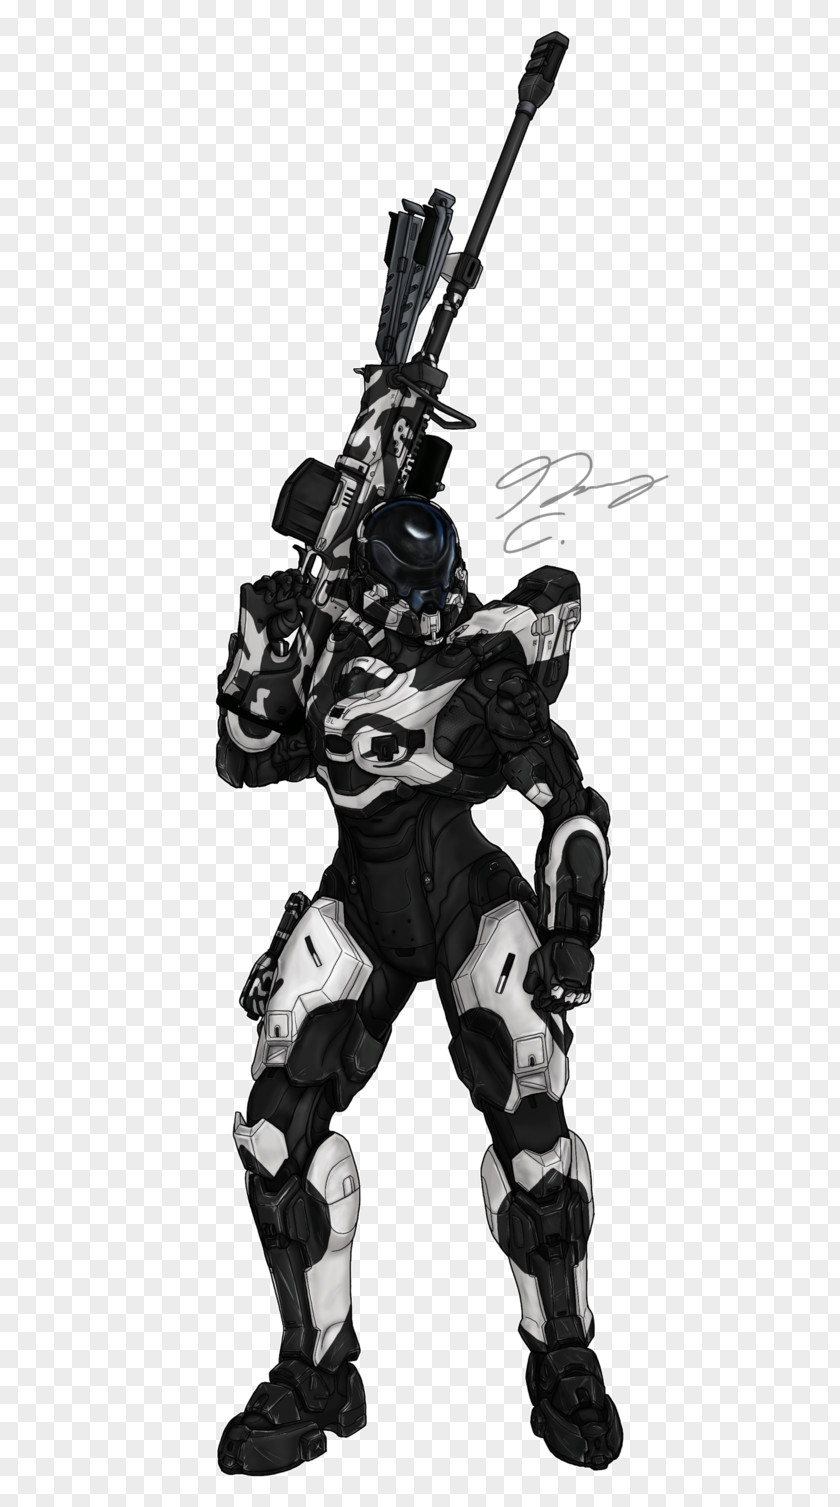 Guuver Halo 4 5: Guardians Master Chief Halo: Reach 3 PNG